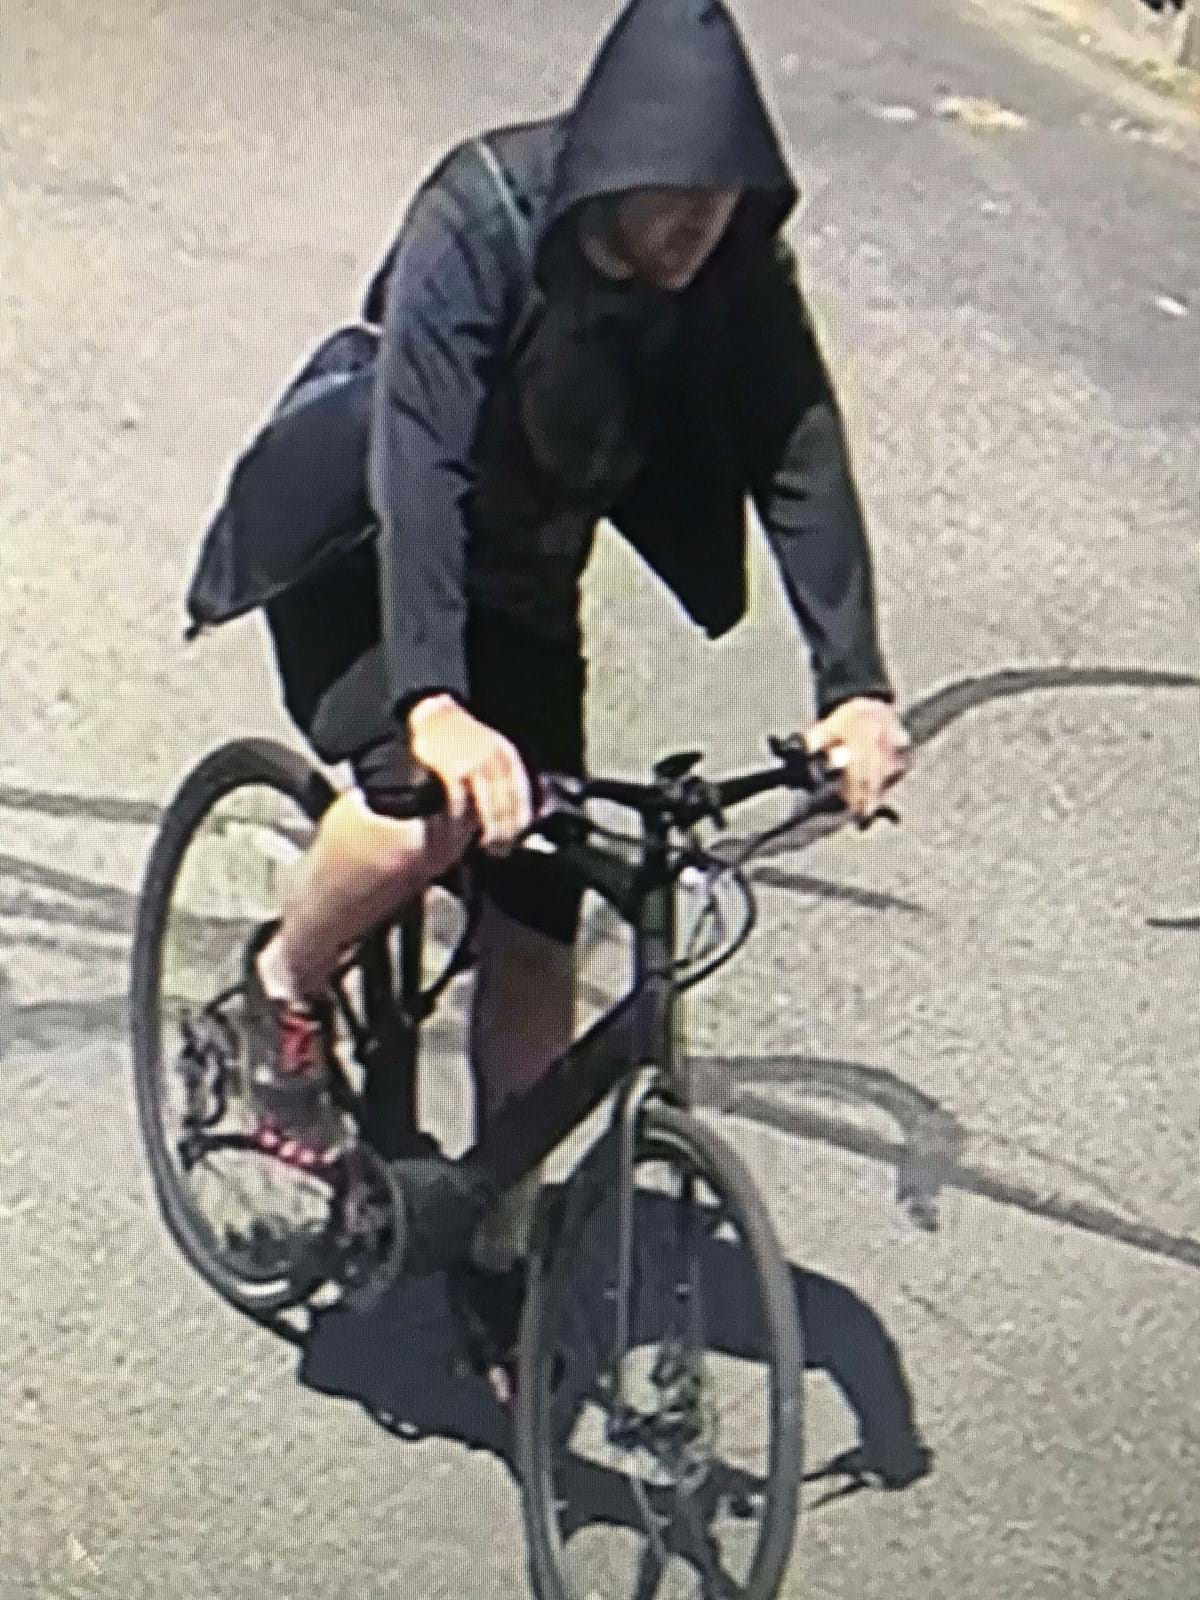 Man wearing a black hoodie and shorts riding a black bicycle.